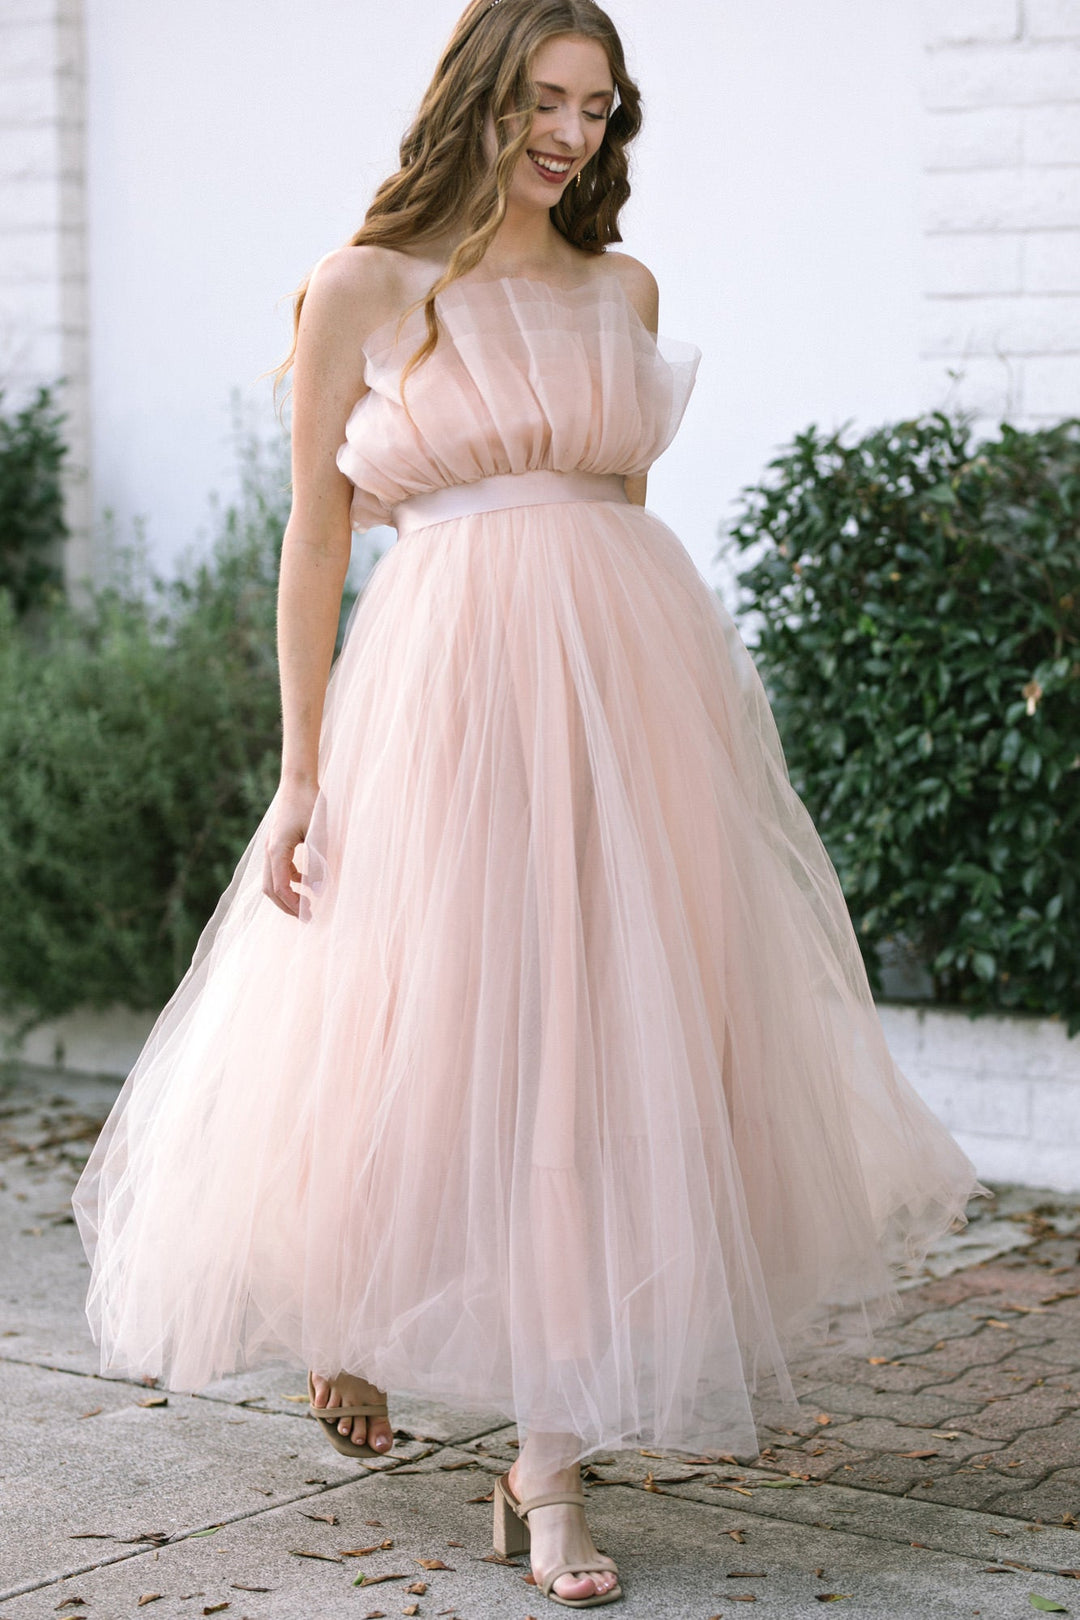 6 Layers 39 Maxi Women Tulle Skirts Long Celebrity Skirt Ball Gown